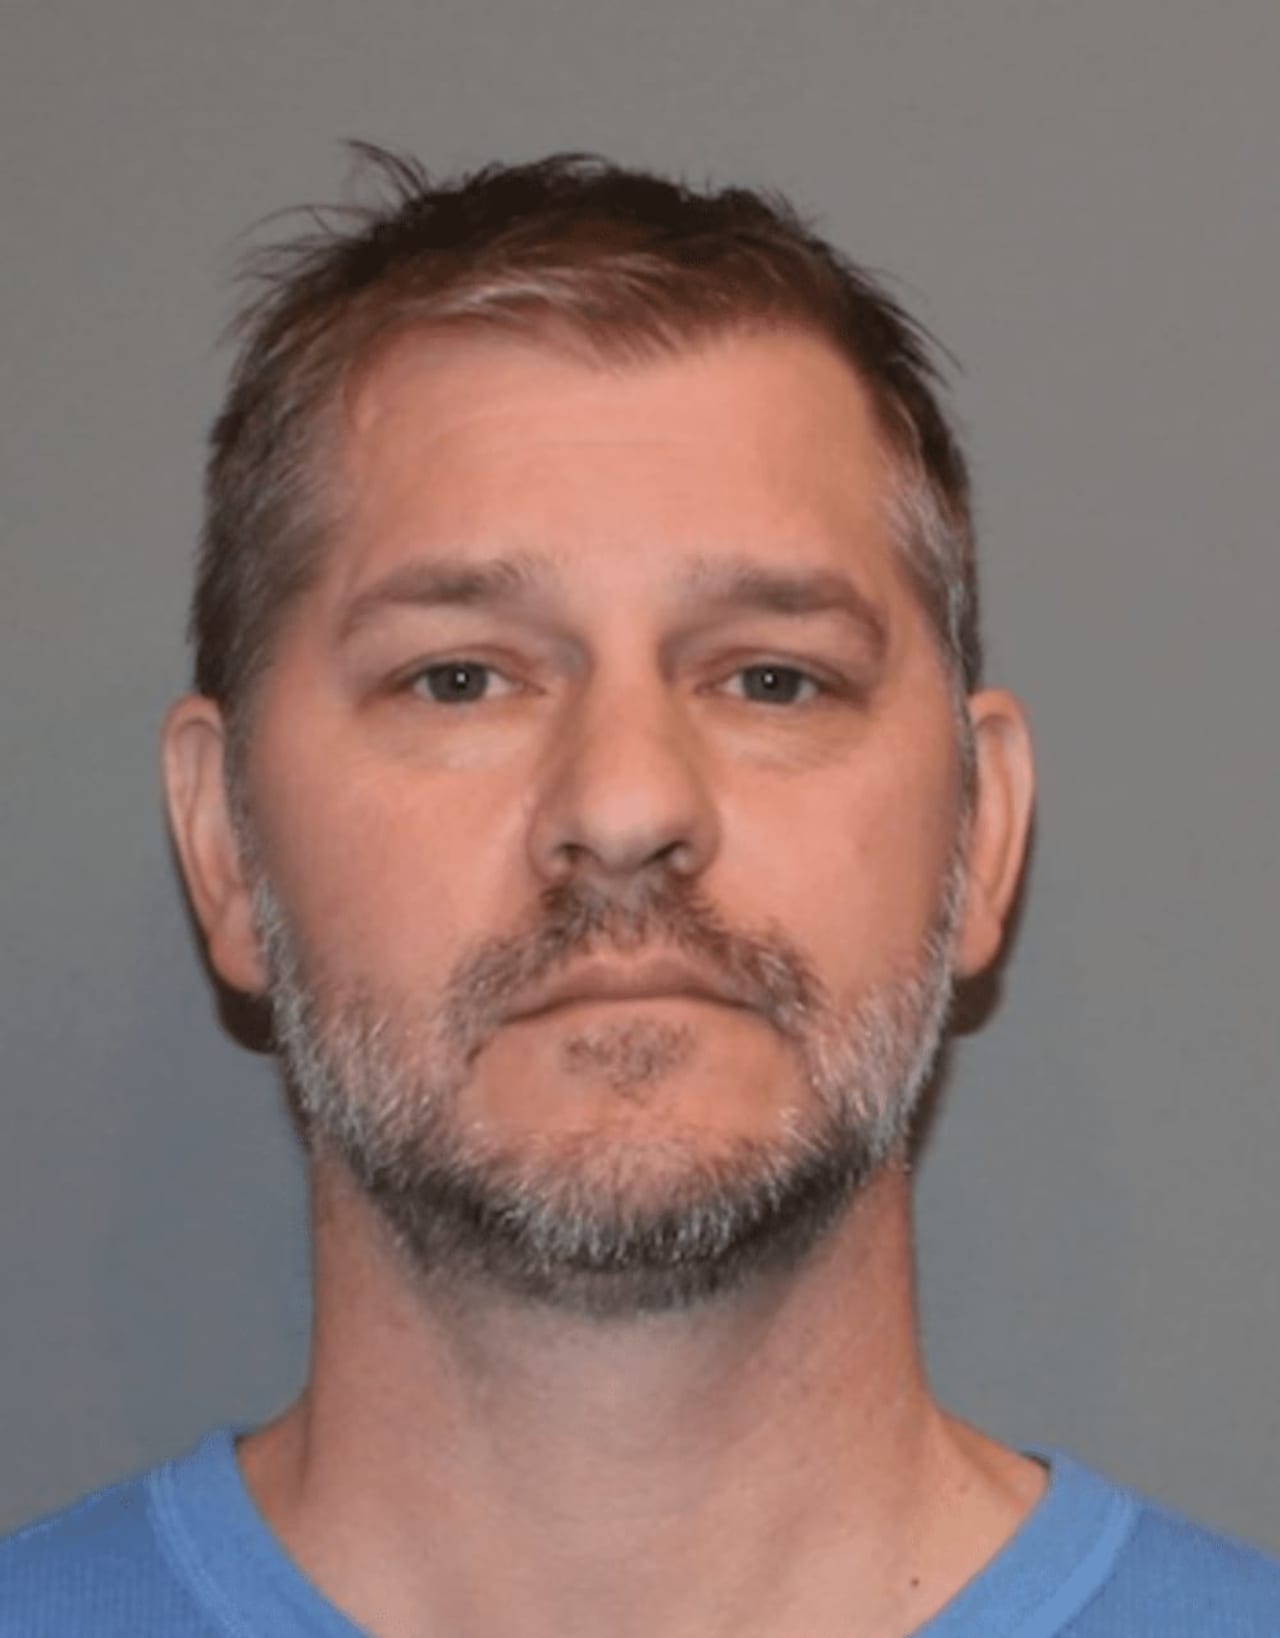 Todd Abbruzzese, 45, of 6 Garden Square, Fairfield is facing weapons charges after police discovered a pair of firearms and knives in his vehicle after he slammed into a utility pole Tuesday afternoon in Norwalk.